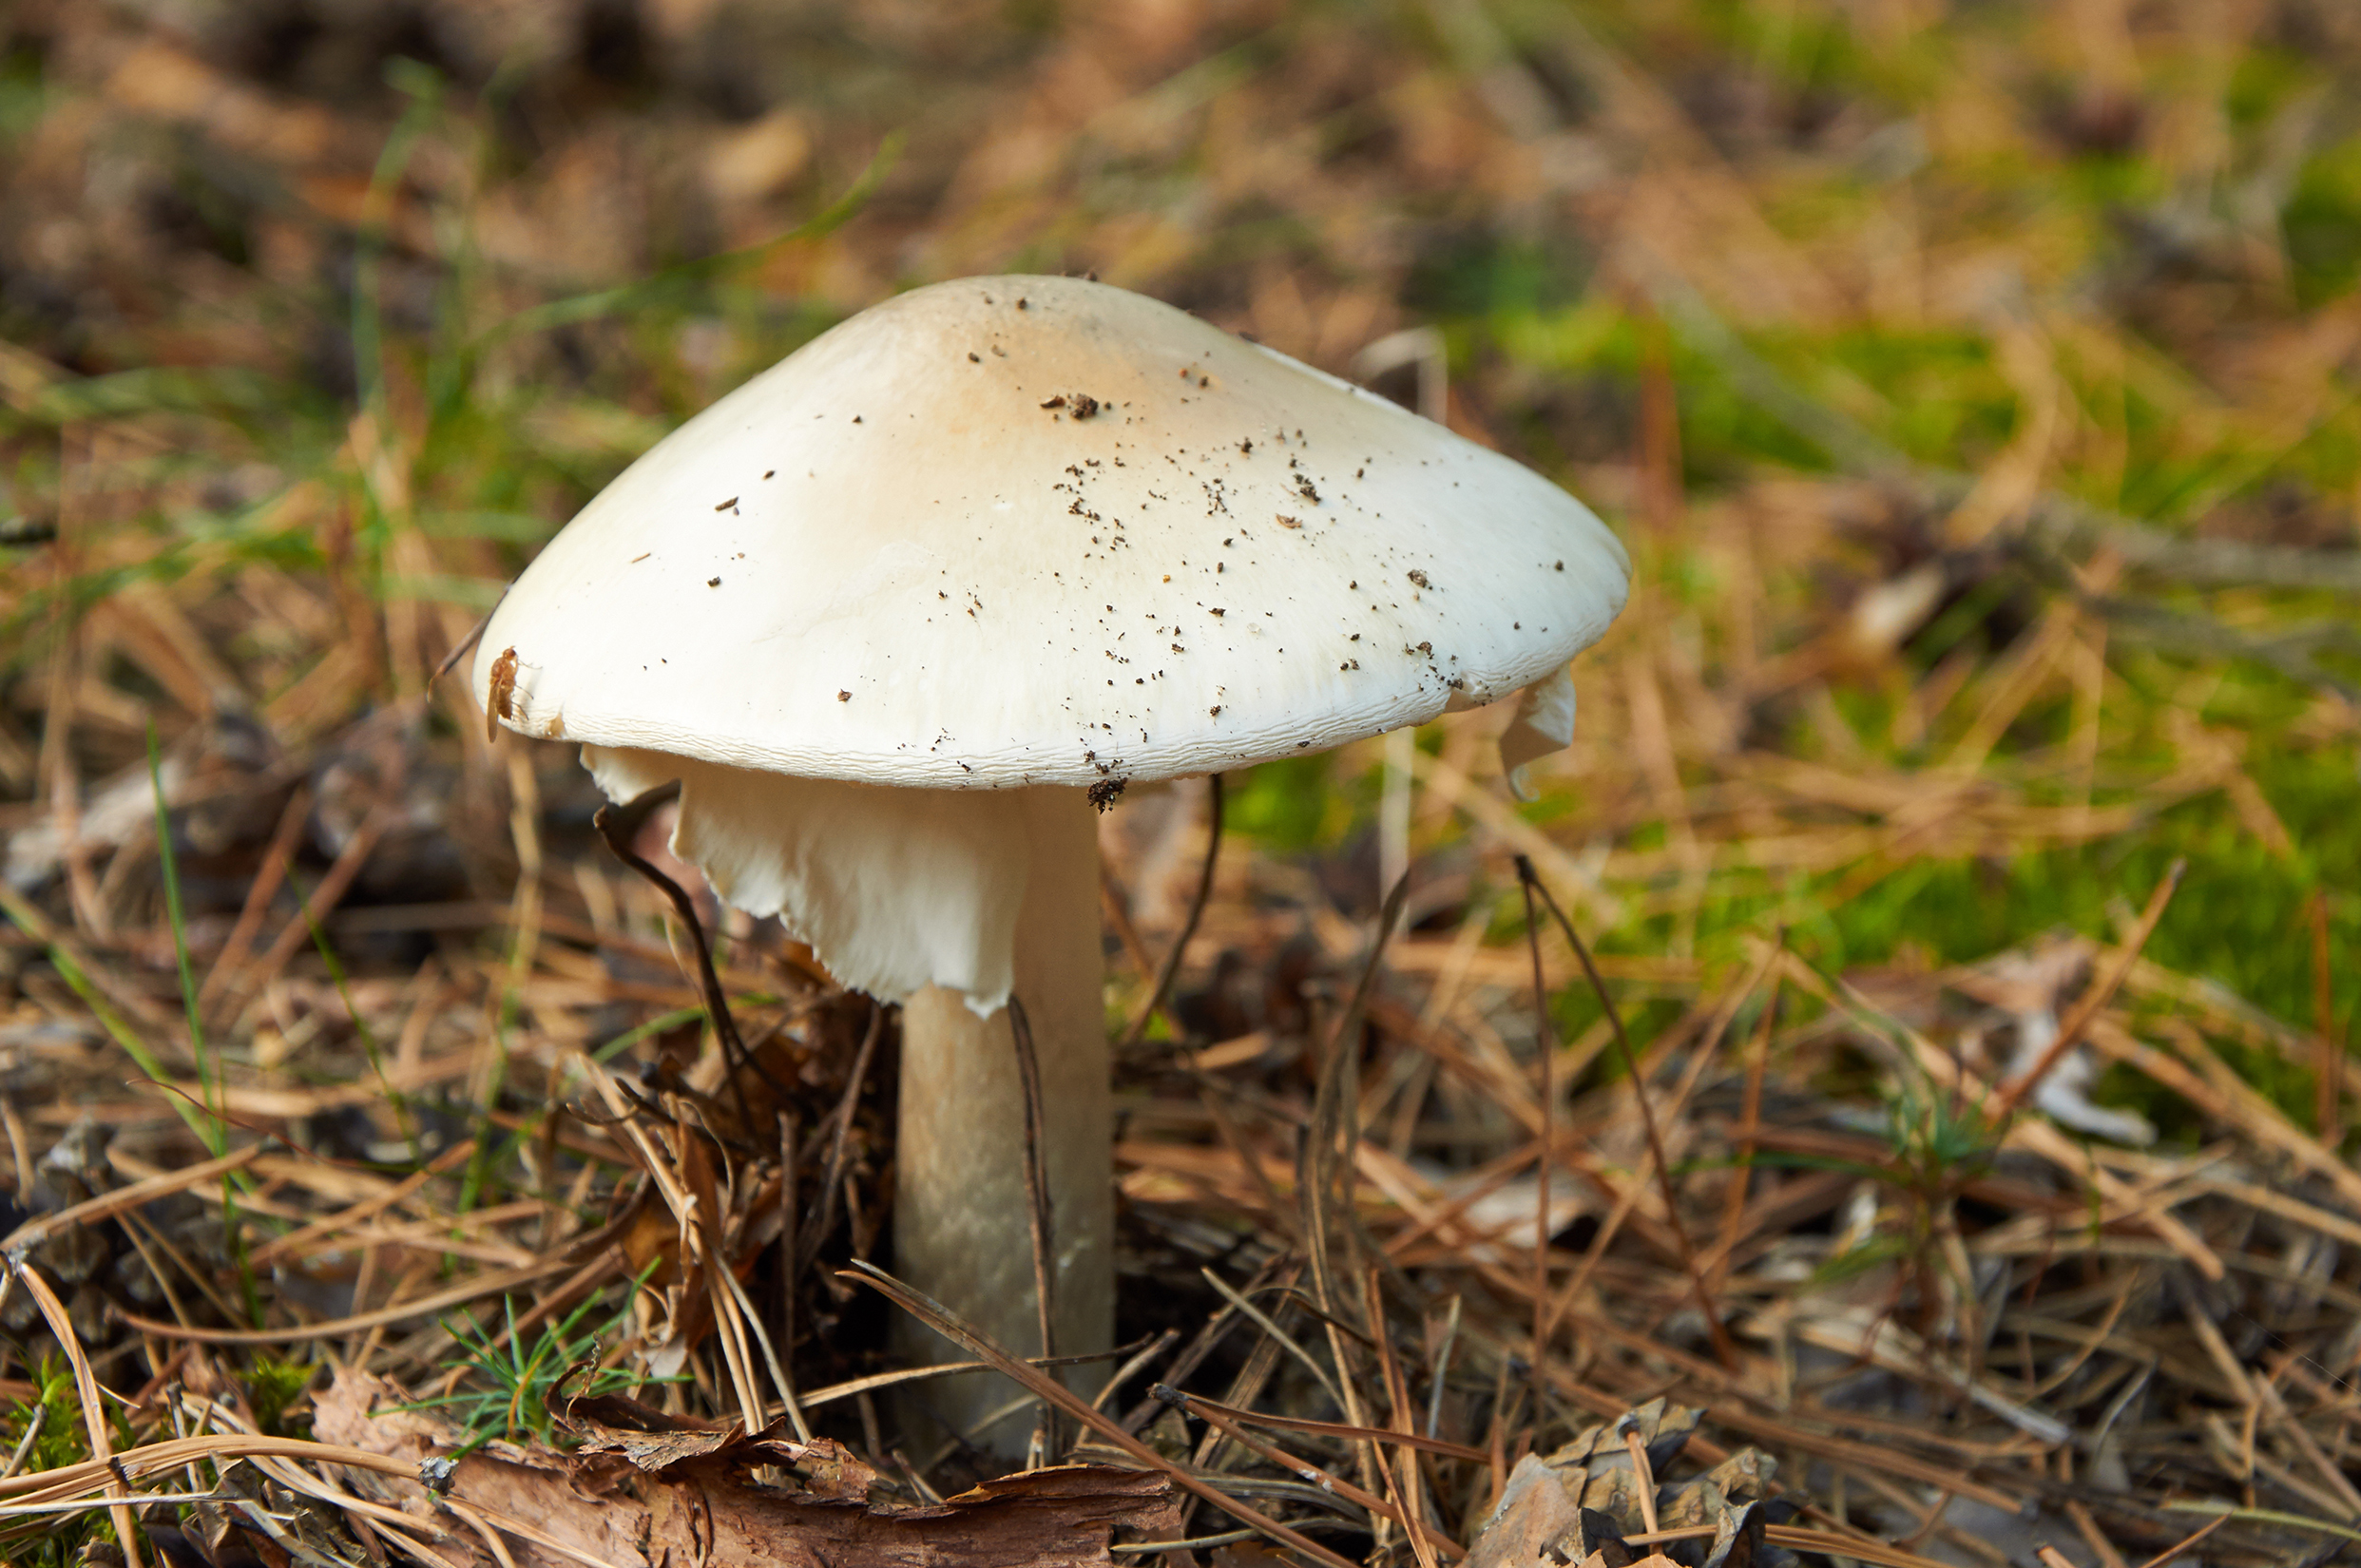 Boy dies after eating poisonous mushroom during family outing - NEWS ...